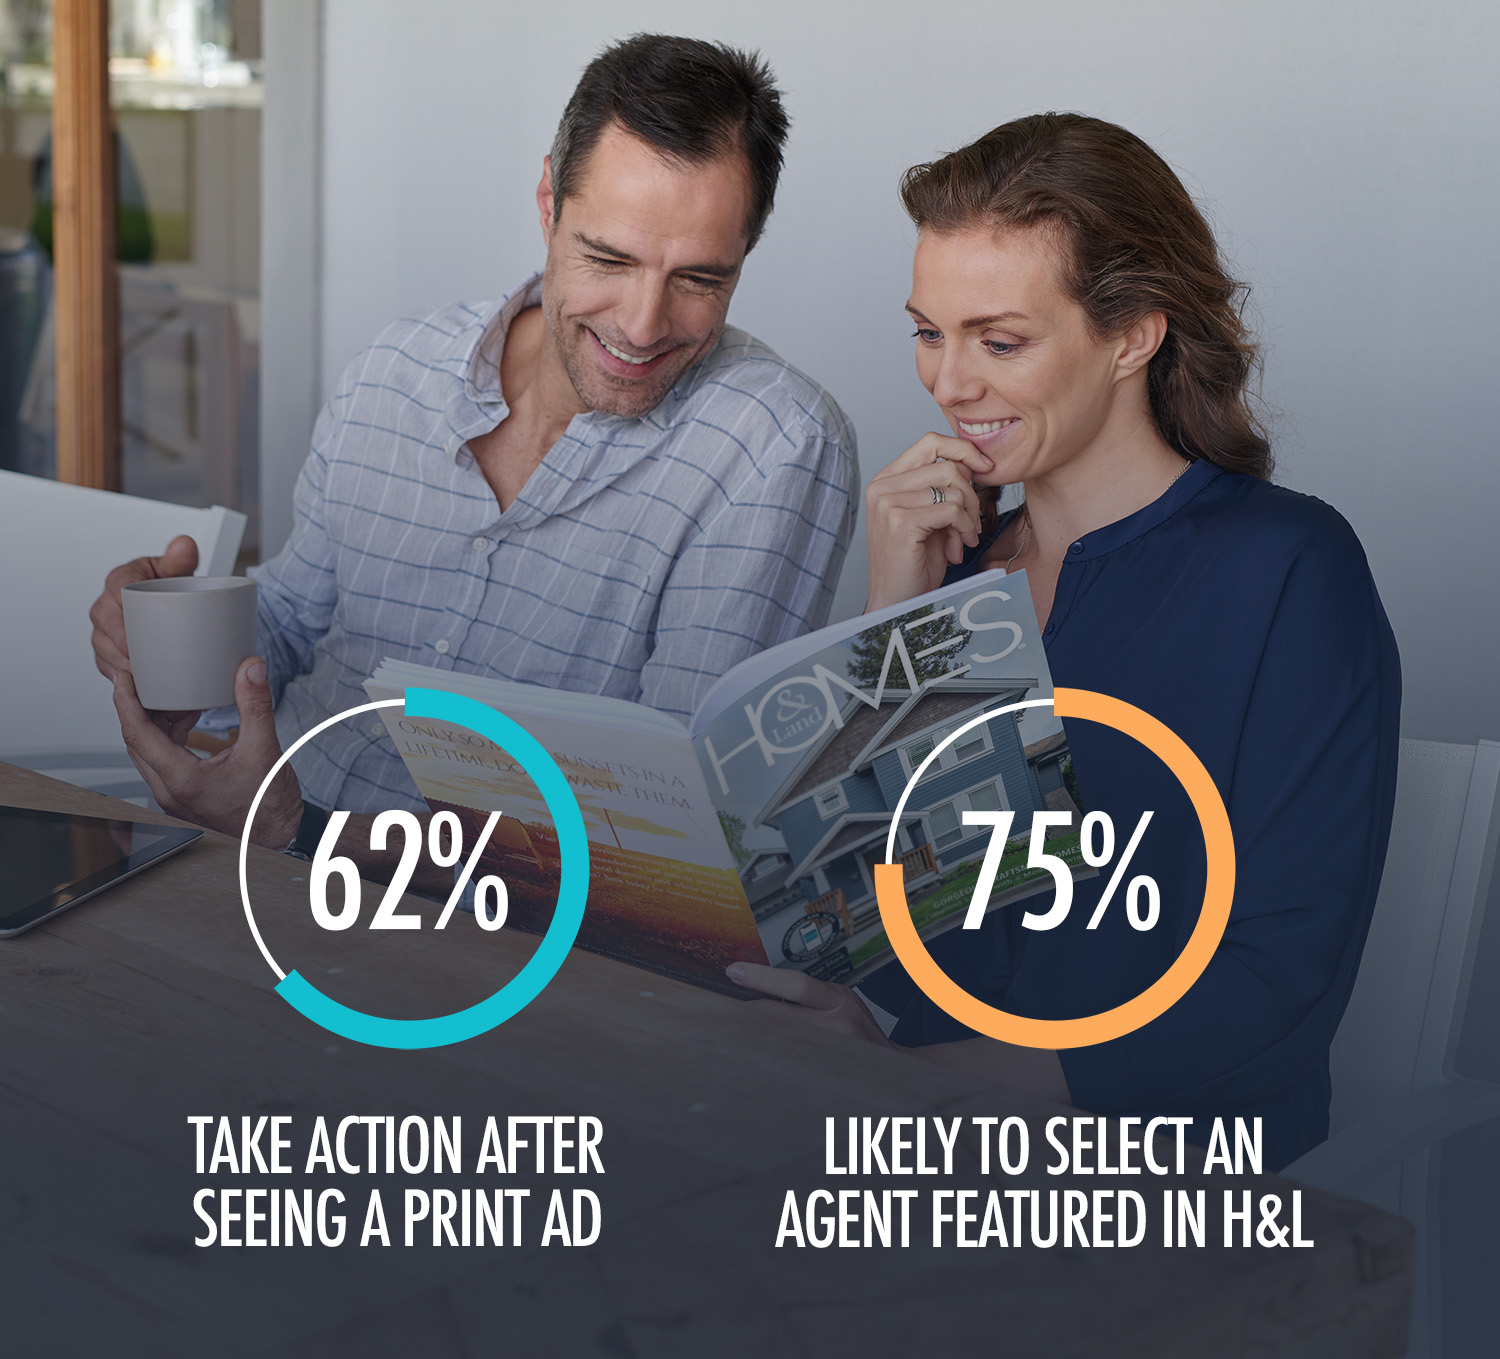 print stats for scottsdale and phoenix real estate magazine on likeliness of real estate agents to act on ad